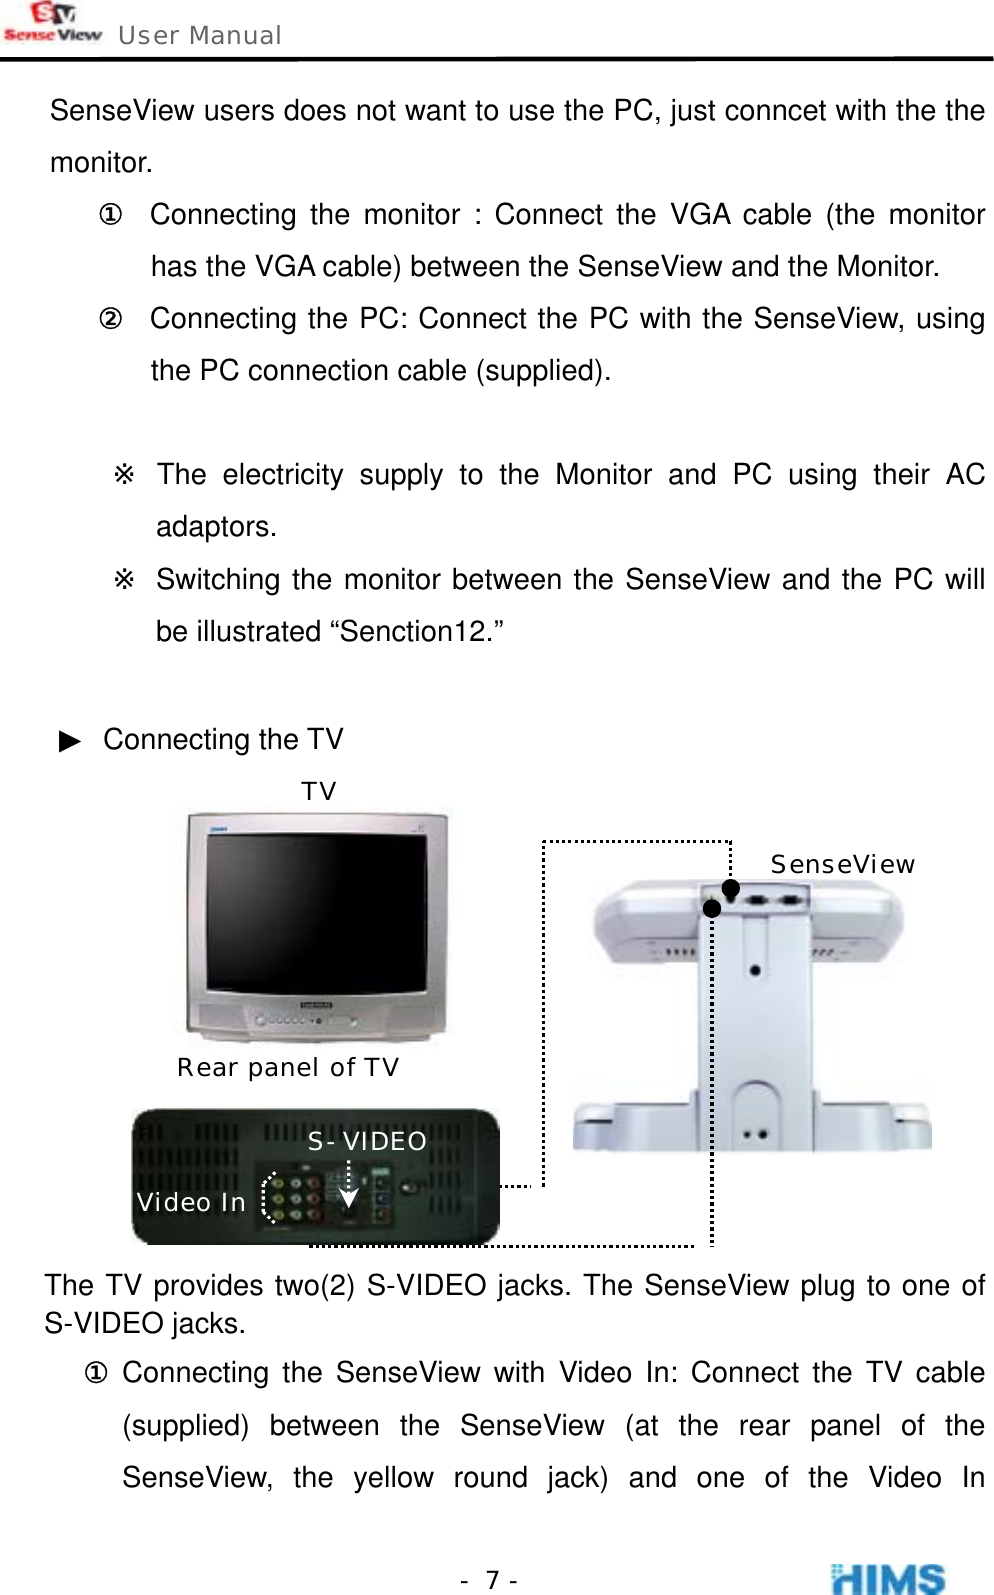  User Manual    - 7 -SenseView users does not want to use the PC, just conncet with the the monitor.  ①  Connecting the monitor : Connect the VGA cable (the monitor has the VGA cable) between the SenseView and the Monitor. ②  Connecting the PC: Connect the PC with the SenseView, using the PC connection cable (supplied).    ※ The electricity supply to the Monitor and PC using their AC adaptors. ※ Switching the monitor between the SenseView and the PC will be illustrated “Senction12.”    ▶ Connecting the TV            The TV provides two(2) S-VIDEO jacks. The SenseView plug to one of S-VIDEO jacks. ① Connecting the SenseView with Video In: Connect the TV cable (supplied) between the SenseView (at the rear panel of the SenseView, the yellow round jack) and one of the Video In S-VIDEOVideo In Rear panel of TV TV SenseView